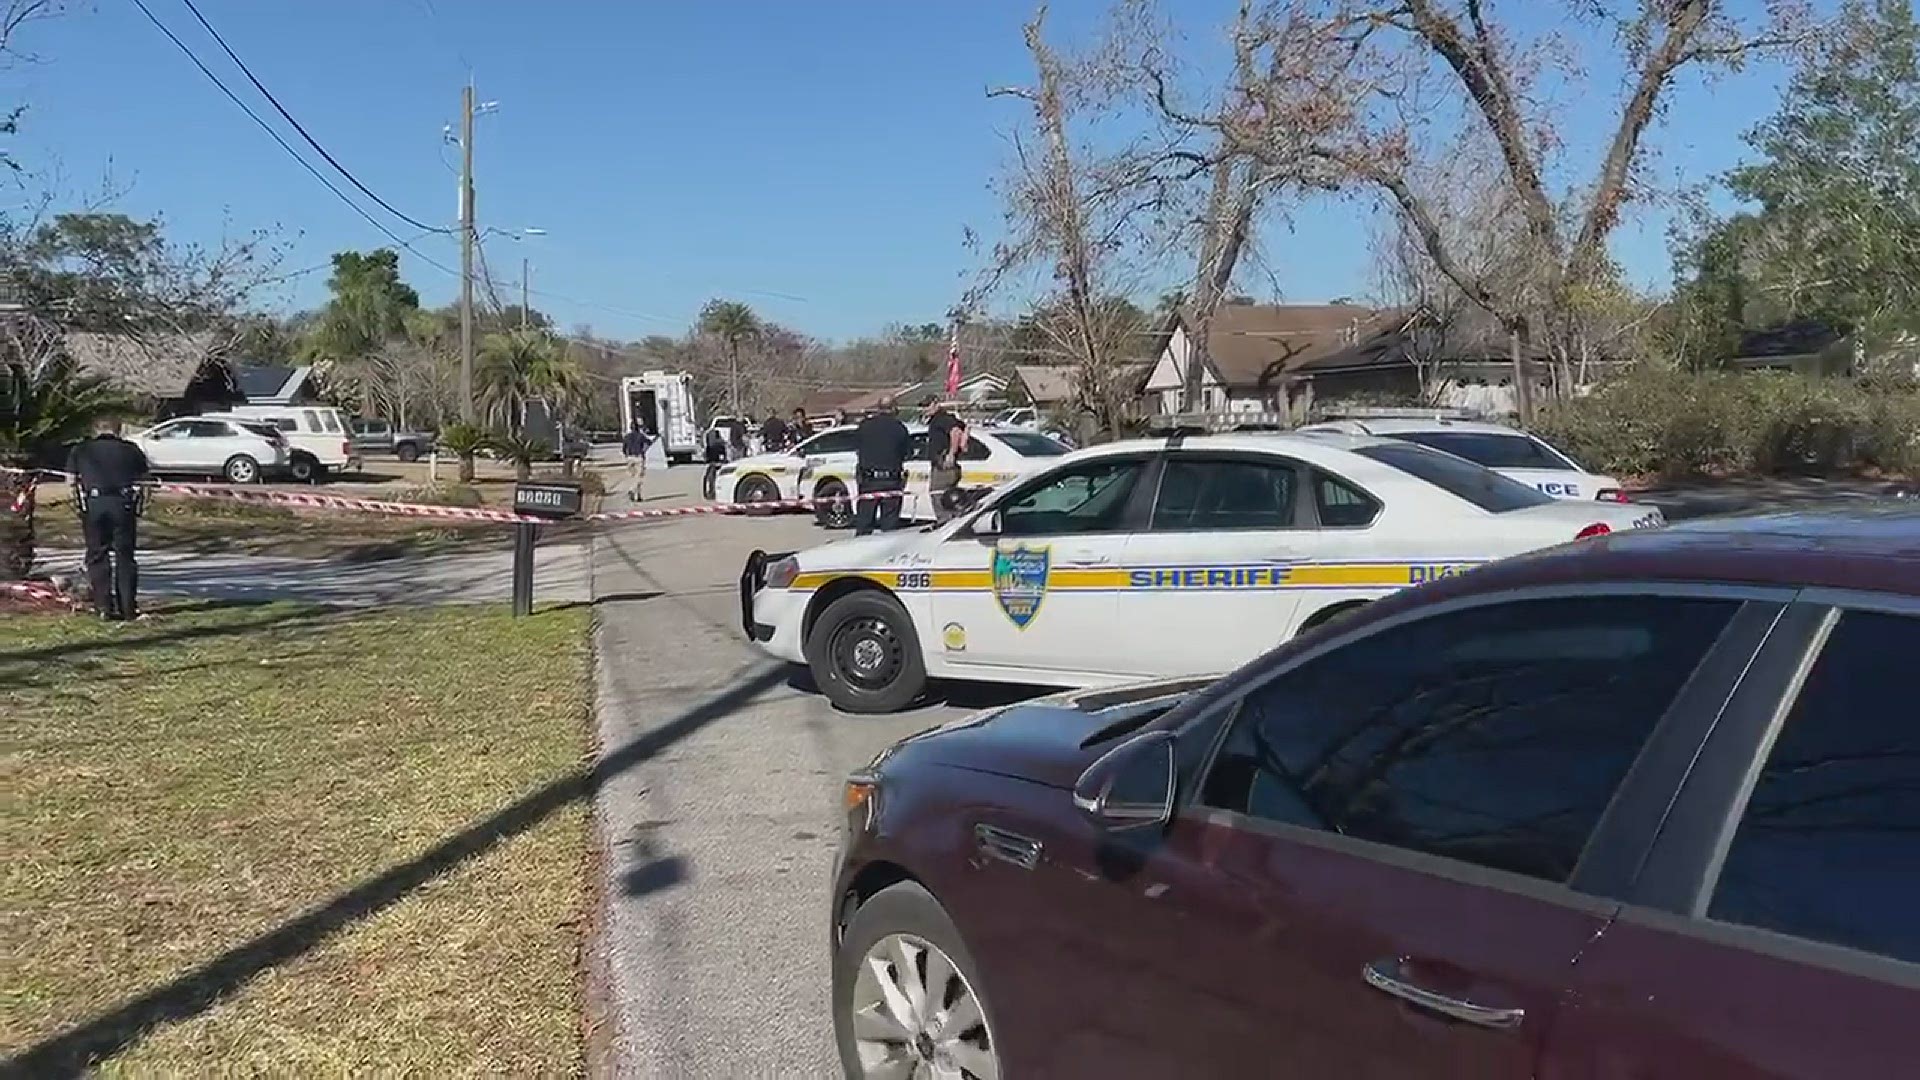 The Jacksonville's Sheriff's Office Bomb Squad unit is back on Toucan Drive, where hours earlier a suspect engaged in a standoff with police. Credit: Jerry McGovern